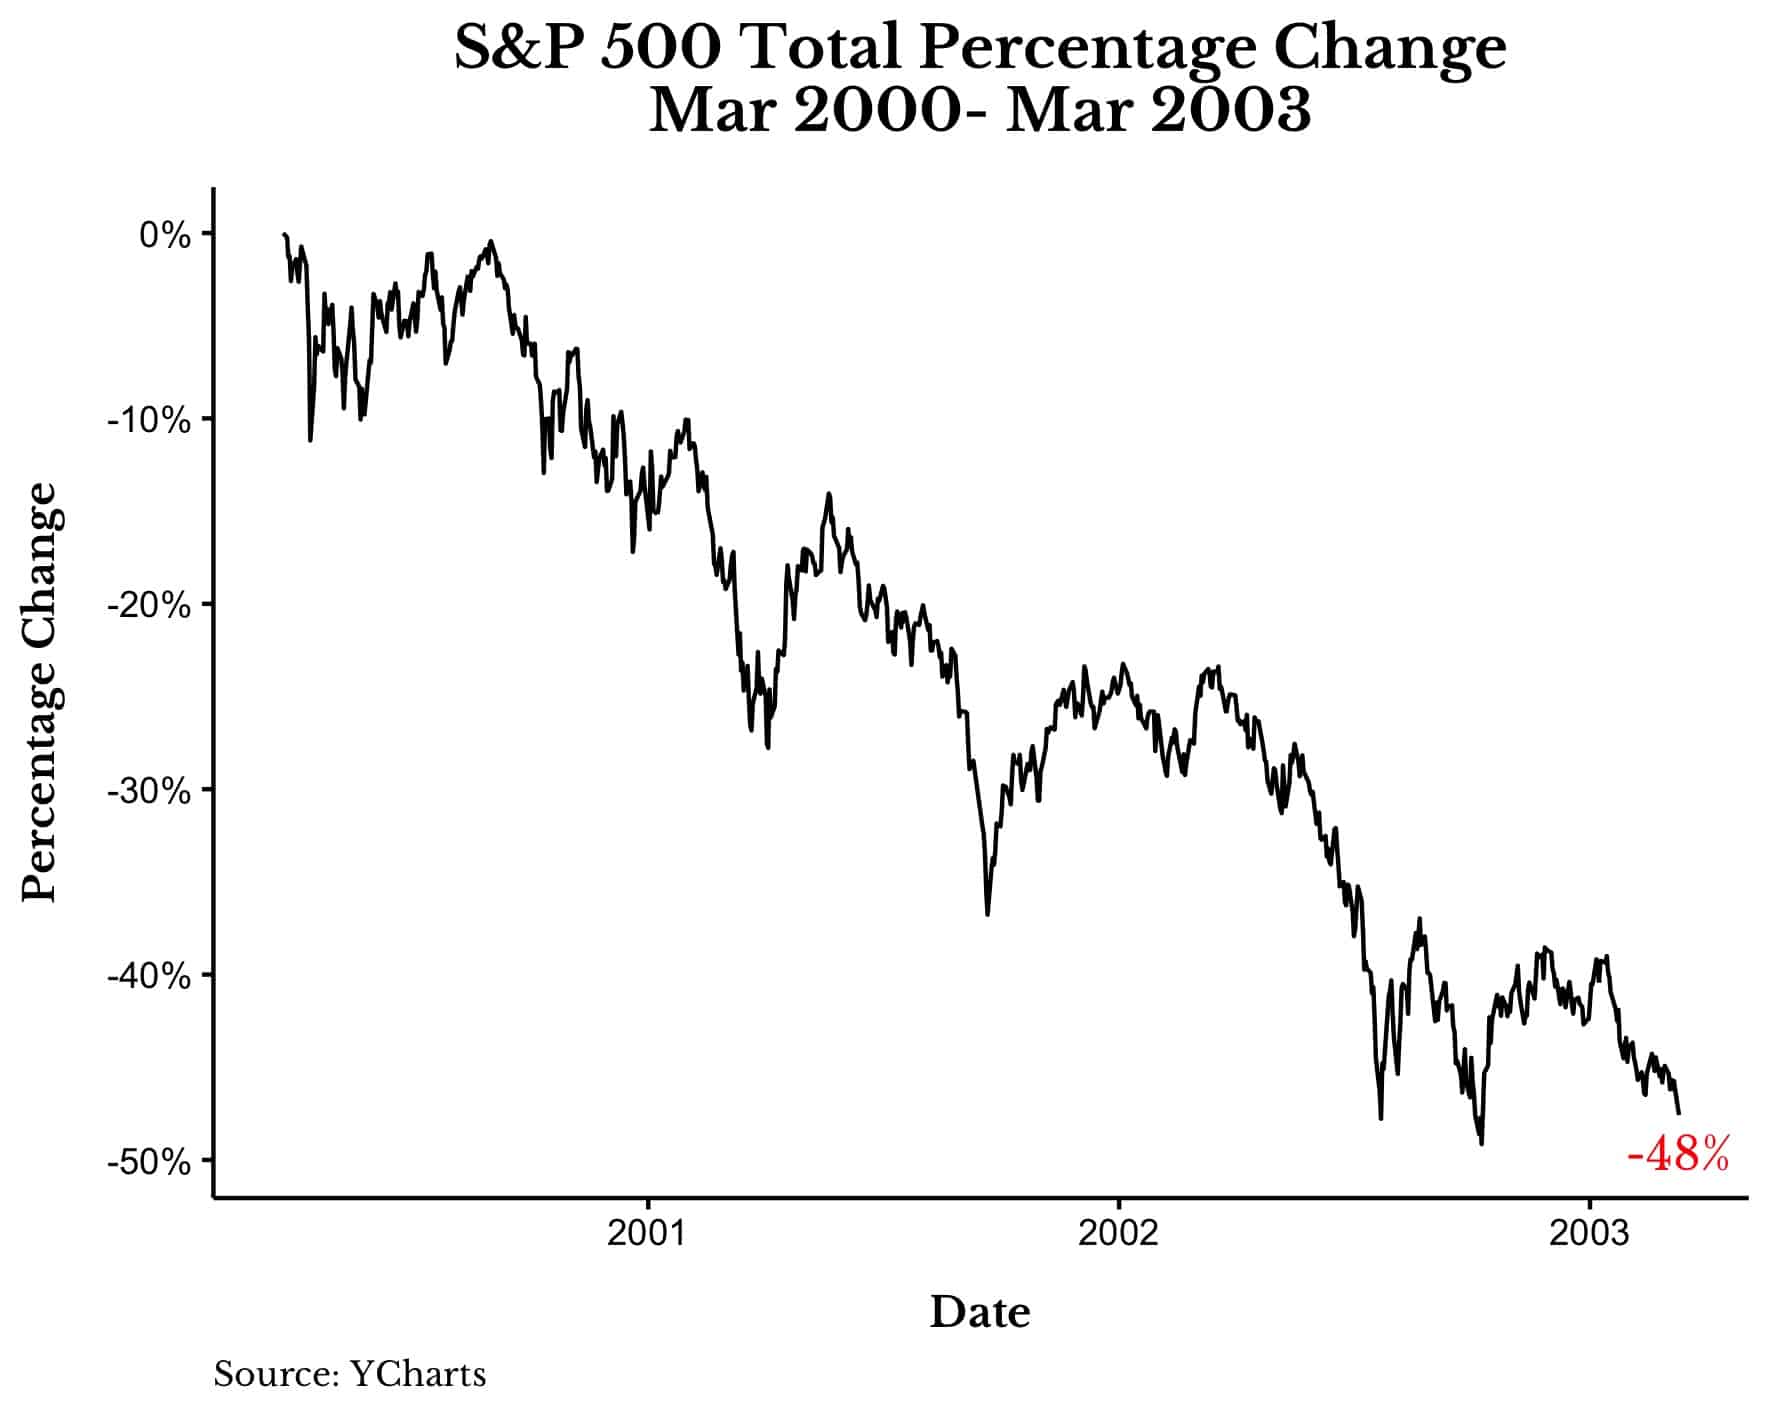 S&P 500 total percentage change from Mar 2000 - Mar 2003